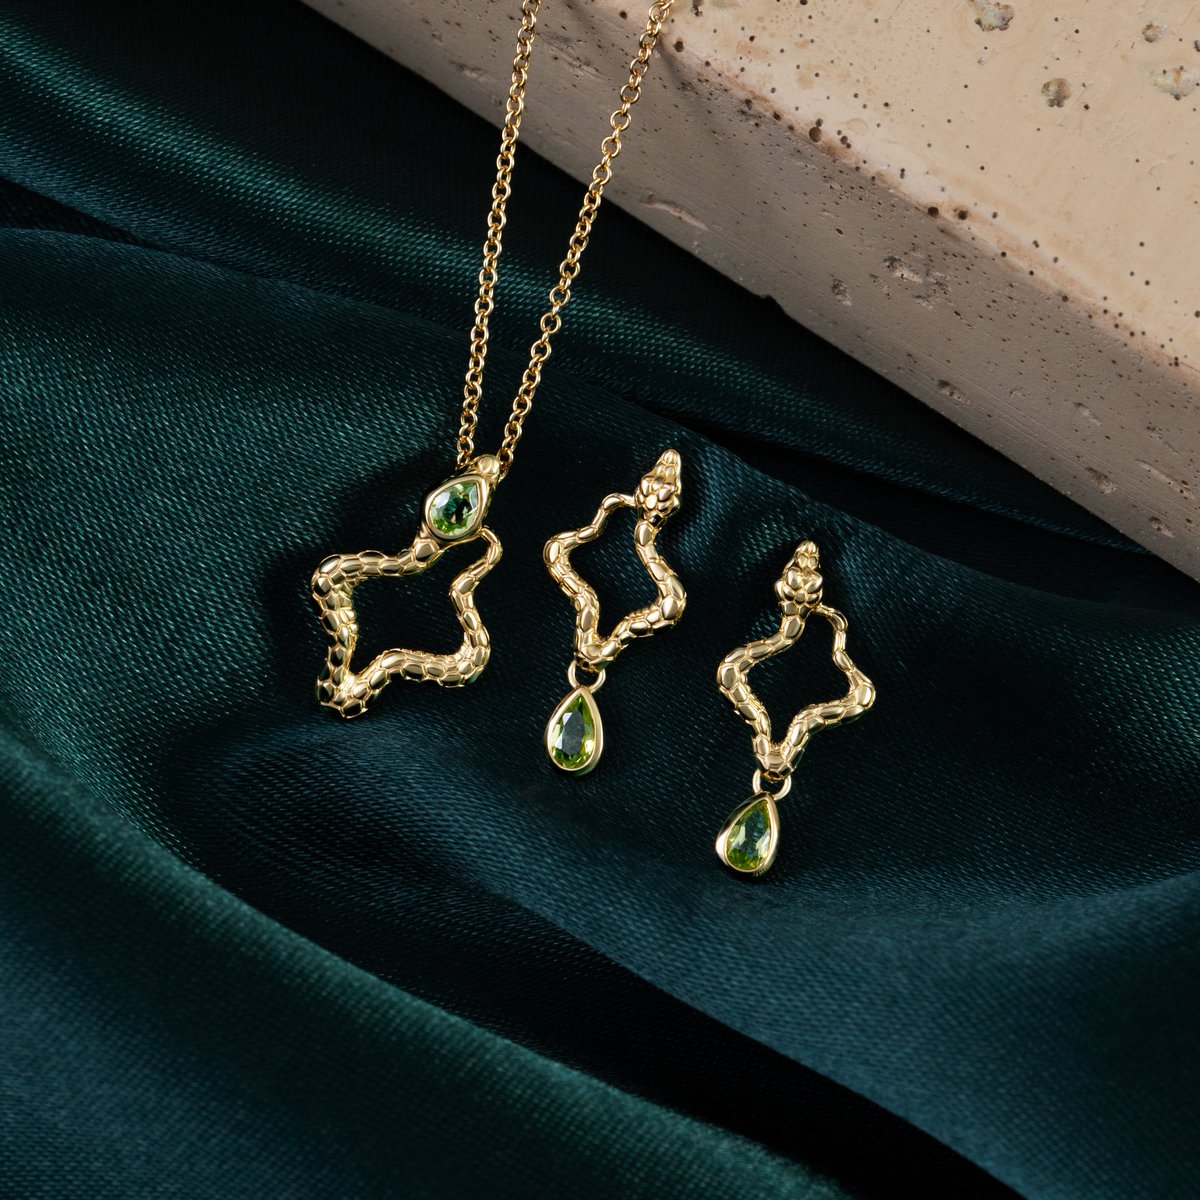 🐍✨ Dare to be bold with ECFEW's serpent-inspired jewellery - slay the fashion game with confidence! 🔥

#jewels #gemondo #jewellery #gemstones #gemstonelover #jewellerylover #gemstonejewelry #springjewellery #May